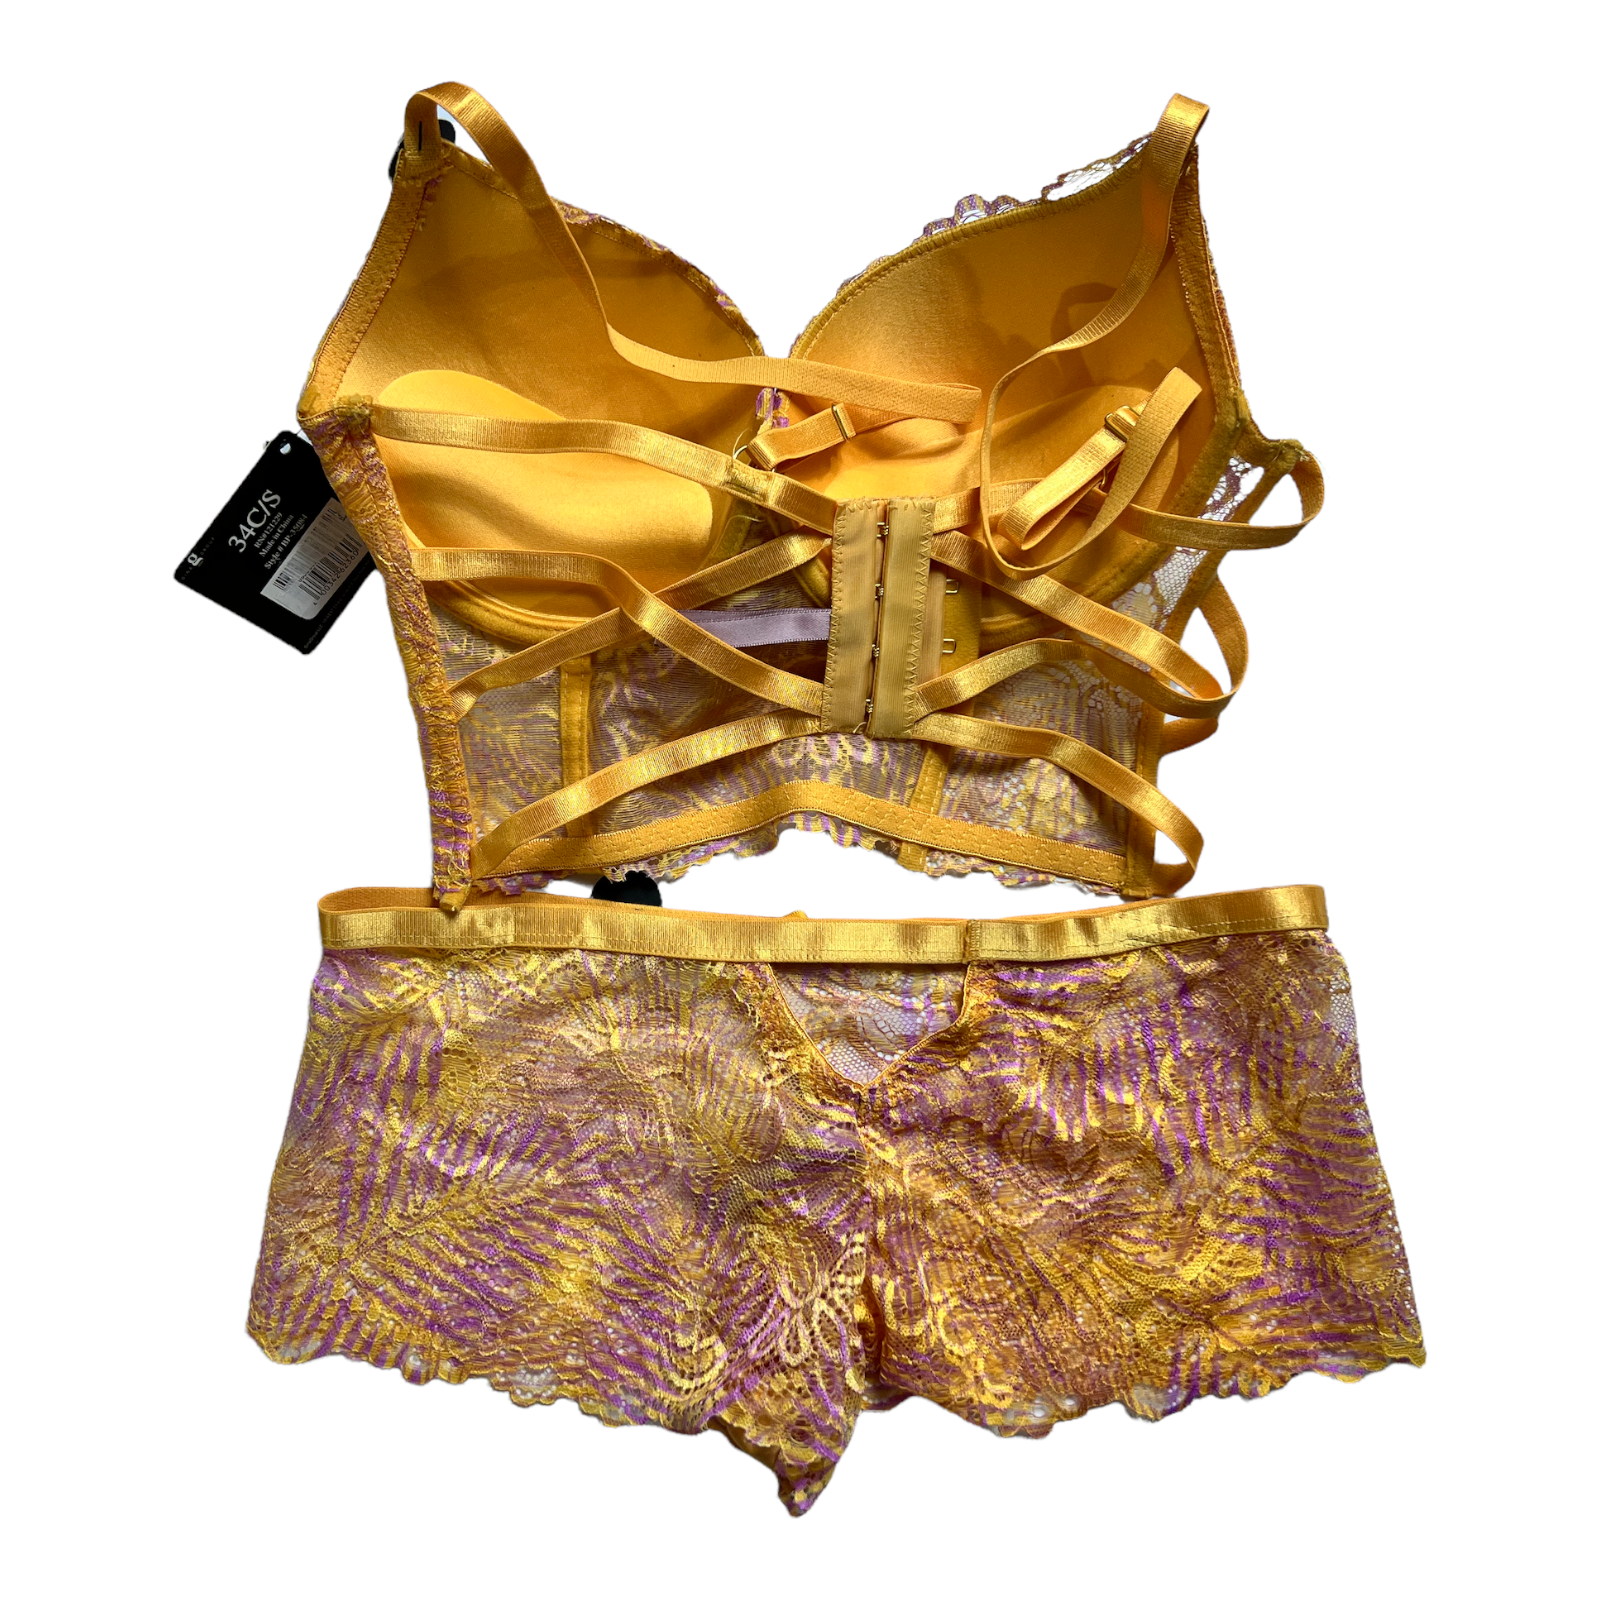 Foxylingerie - NaNa bra set available in stock Size available 34C